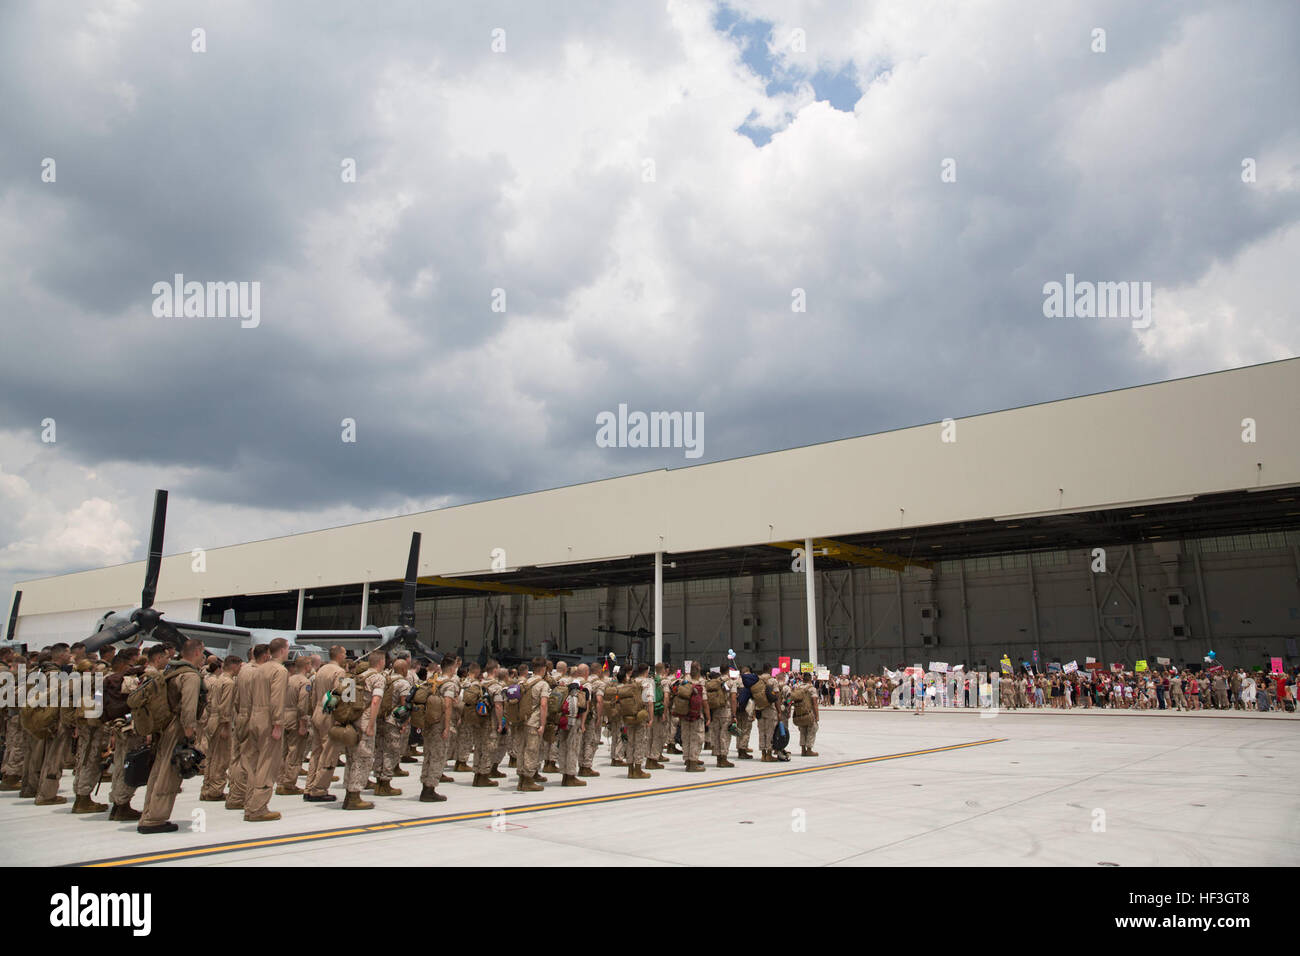 Marines with Marine Medium Tiltrotor Squadron 365 (Reinforced), 24th Marine Expeditionary Unit stand in formation prior to reuniting with their families during the Aviation Combat Element’s homecoming at Marine Corps Air Station New River, N.C. July 16, 2015. Marines and Sailors of the 24th MEU were embarked on the ships of the Iwo Jima Amphibious Ready Group and supported operations in the U.S. 5th and 6th Fleet area of operations. They also took part in numerous theater security cooperation exercises and training with allied partners such as Djibouti, Italy, Oman, Spain, France, Jordan, Isra Stock Photo